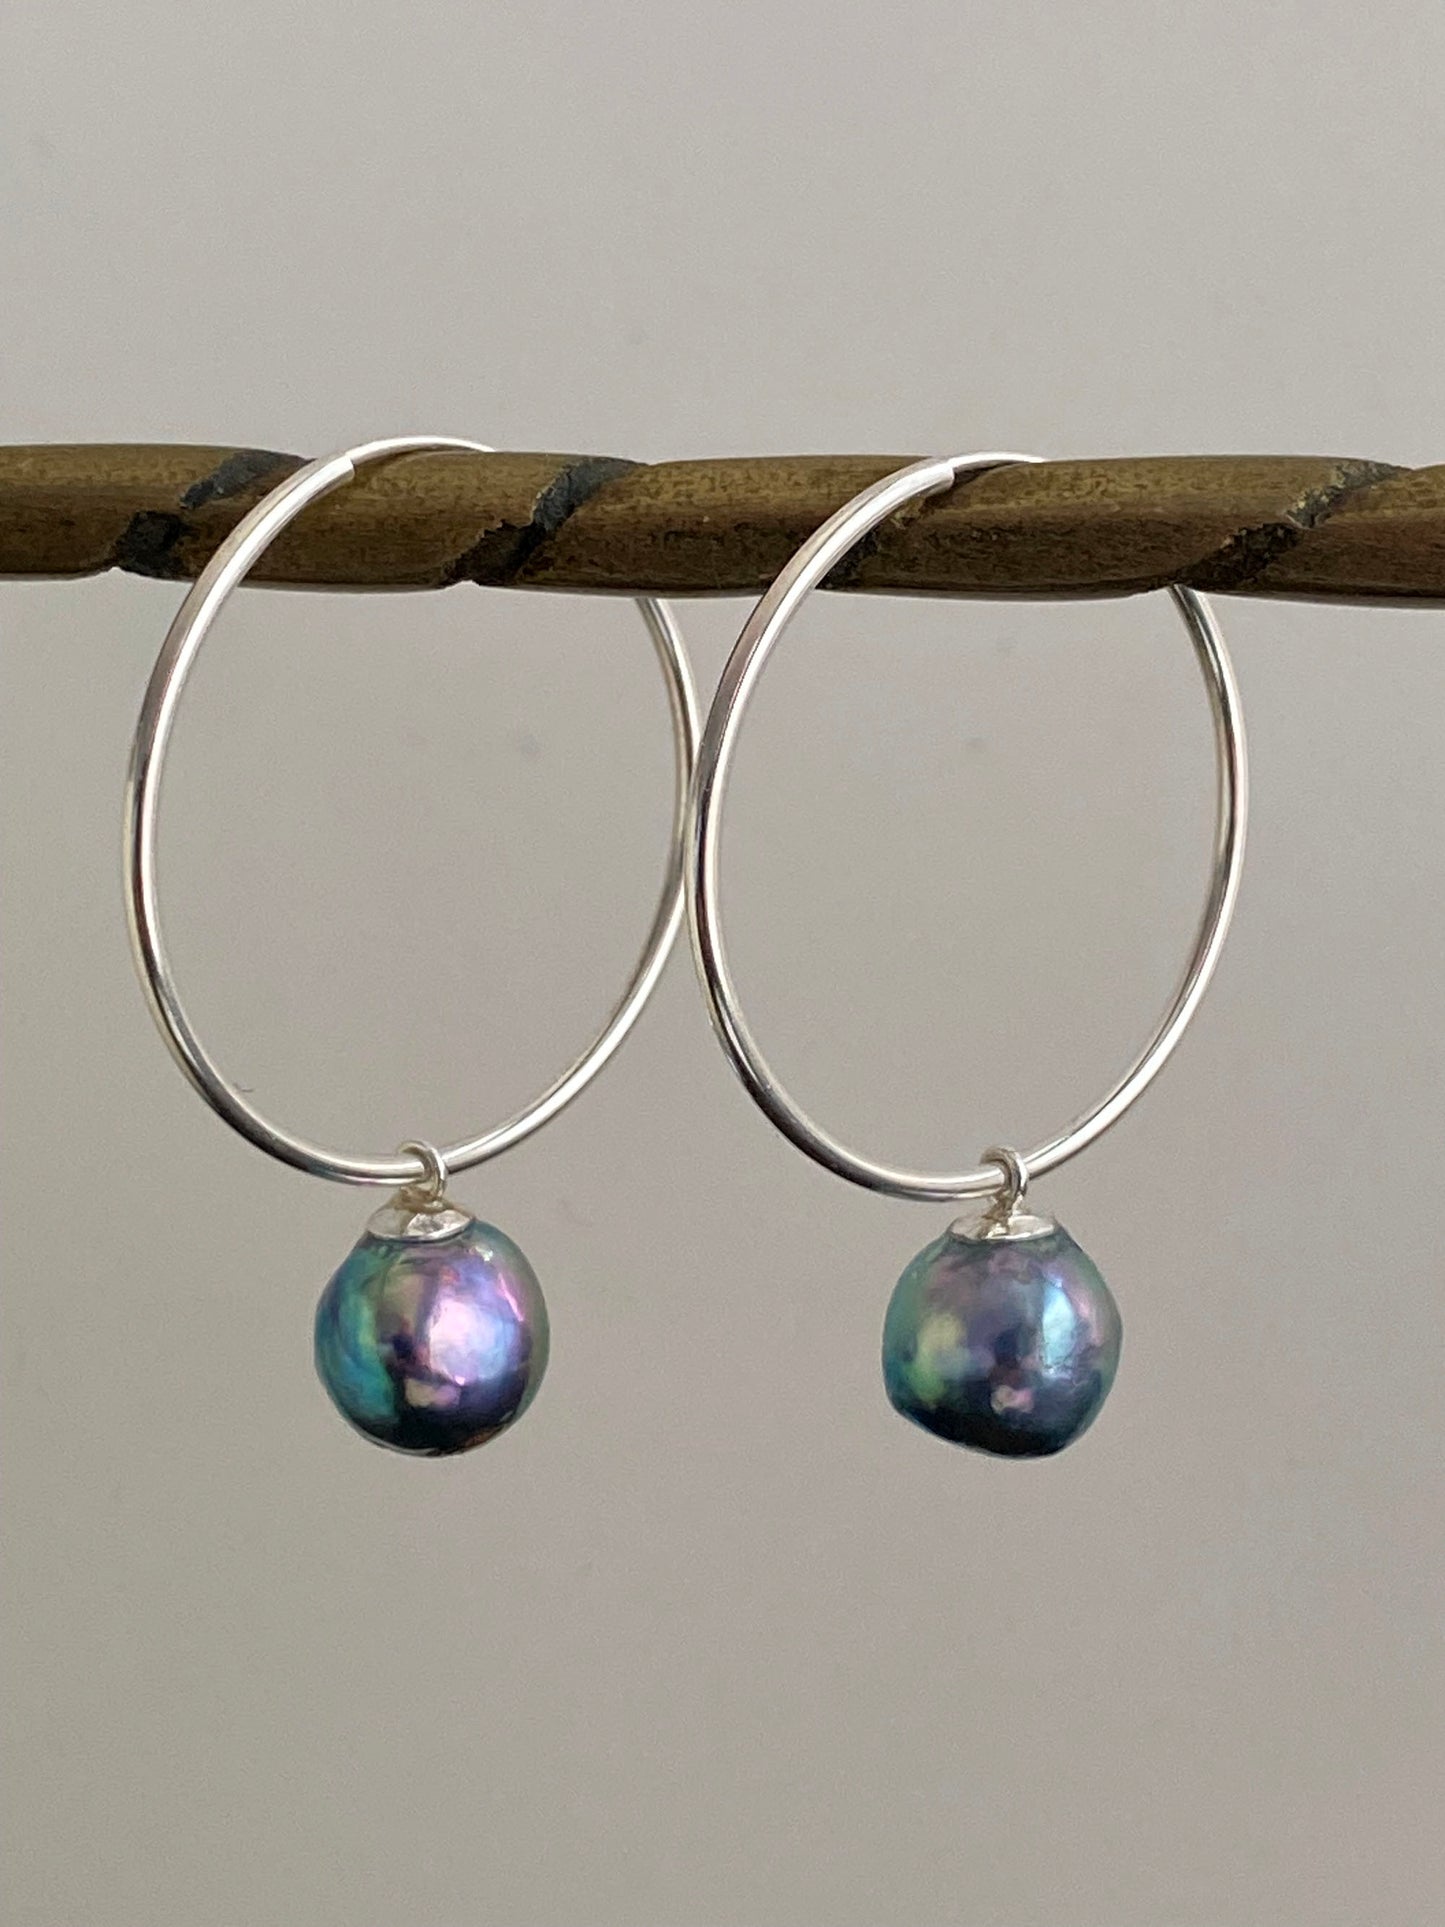 Blue Akoya Pearls on Sterling Silver Hoops #1 by Linda Queally